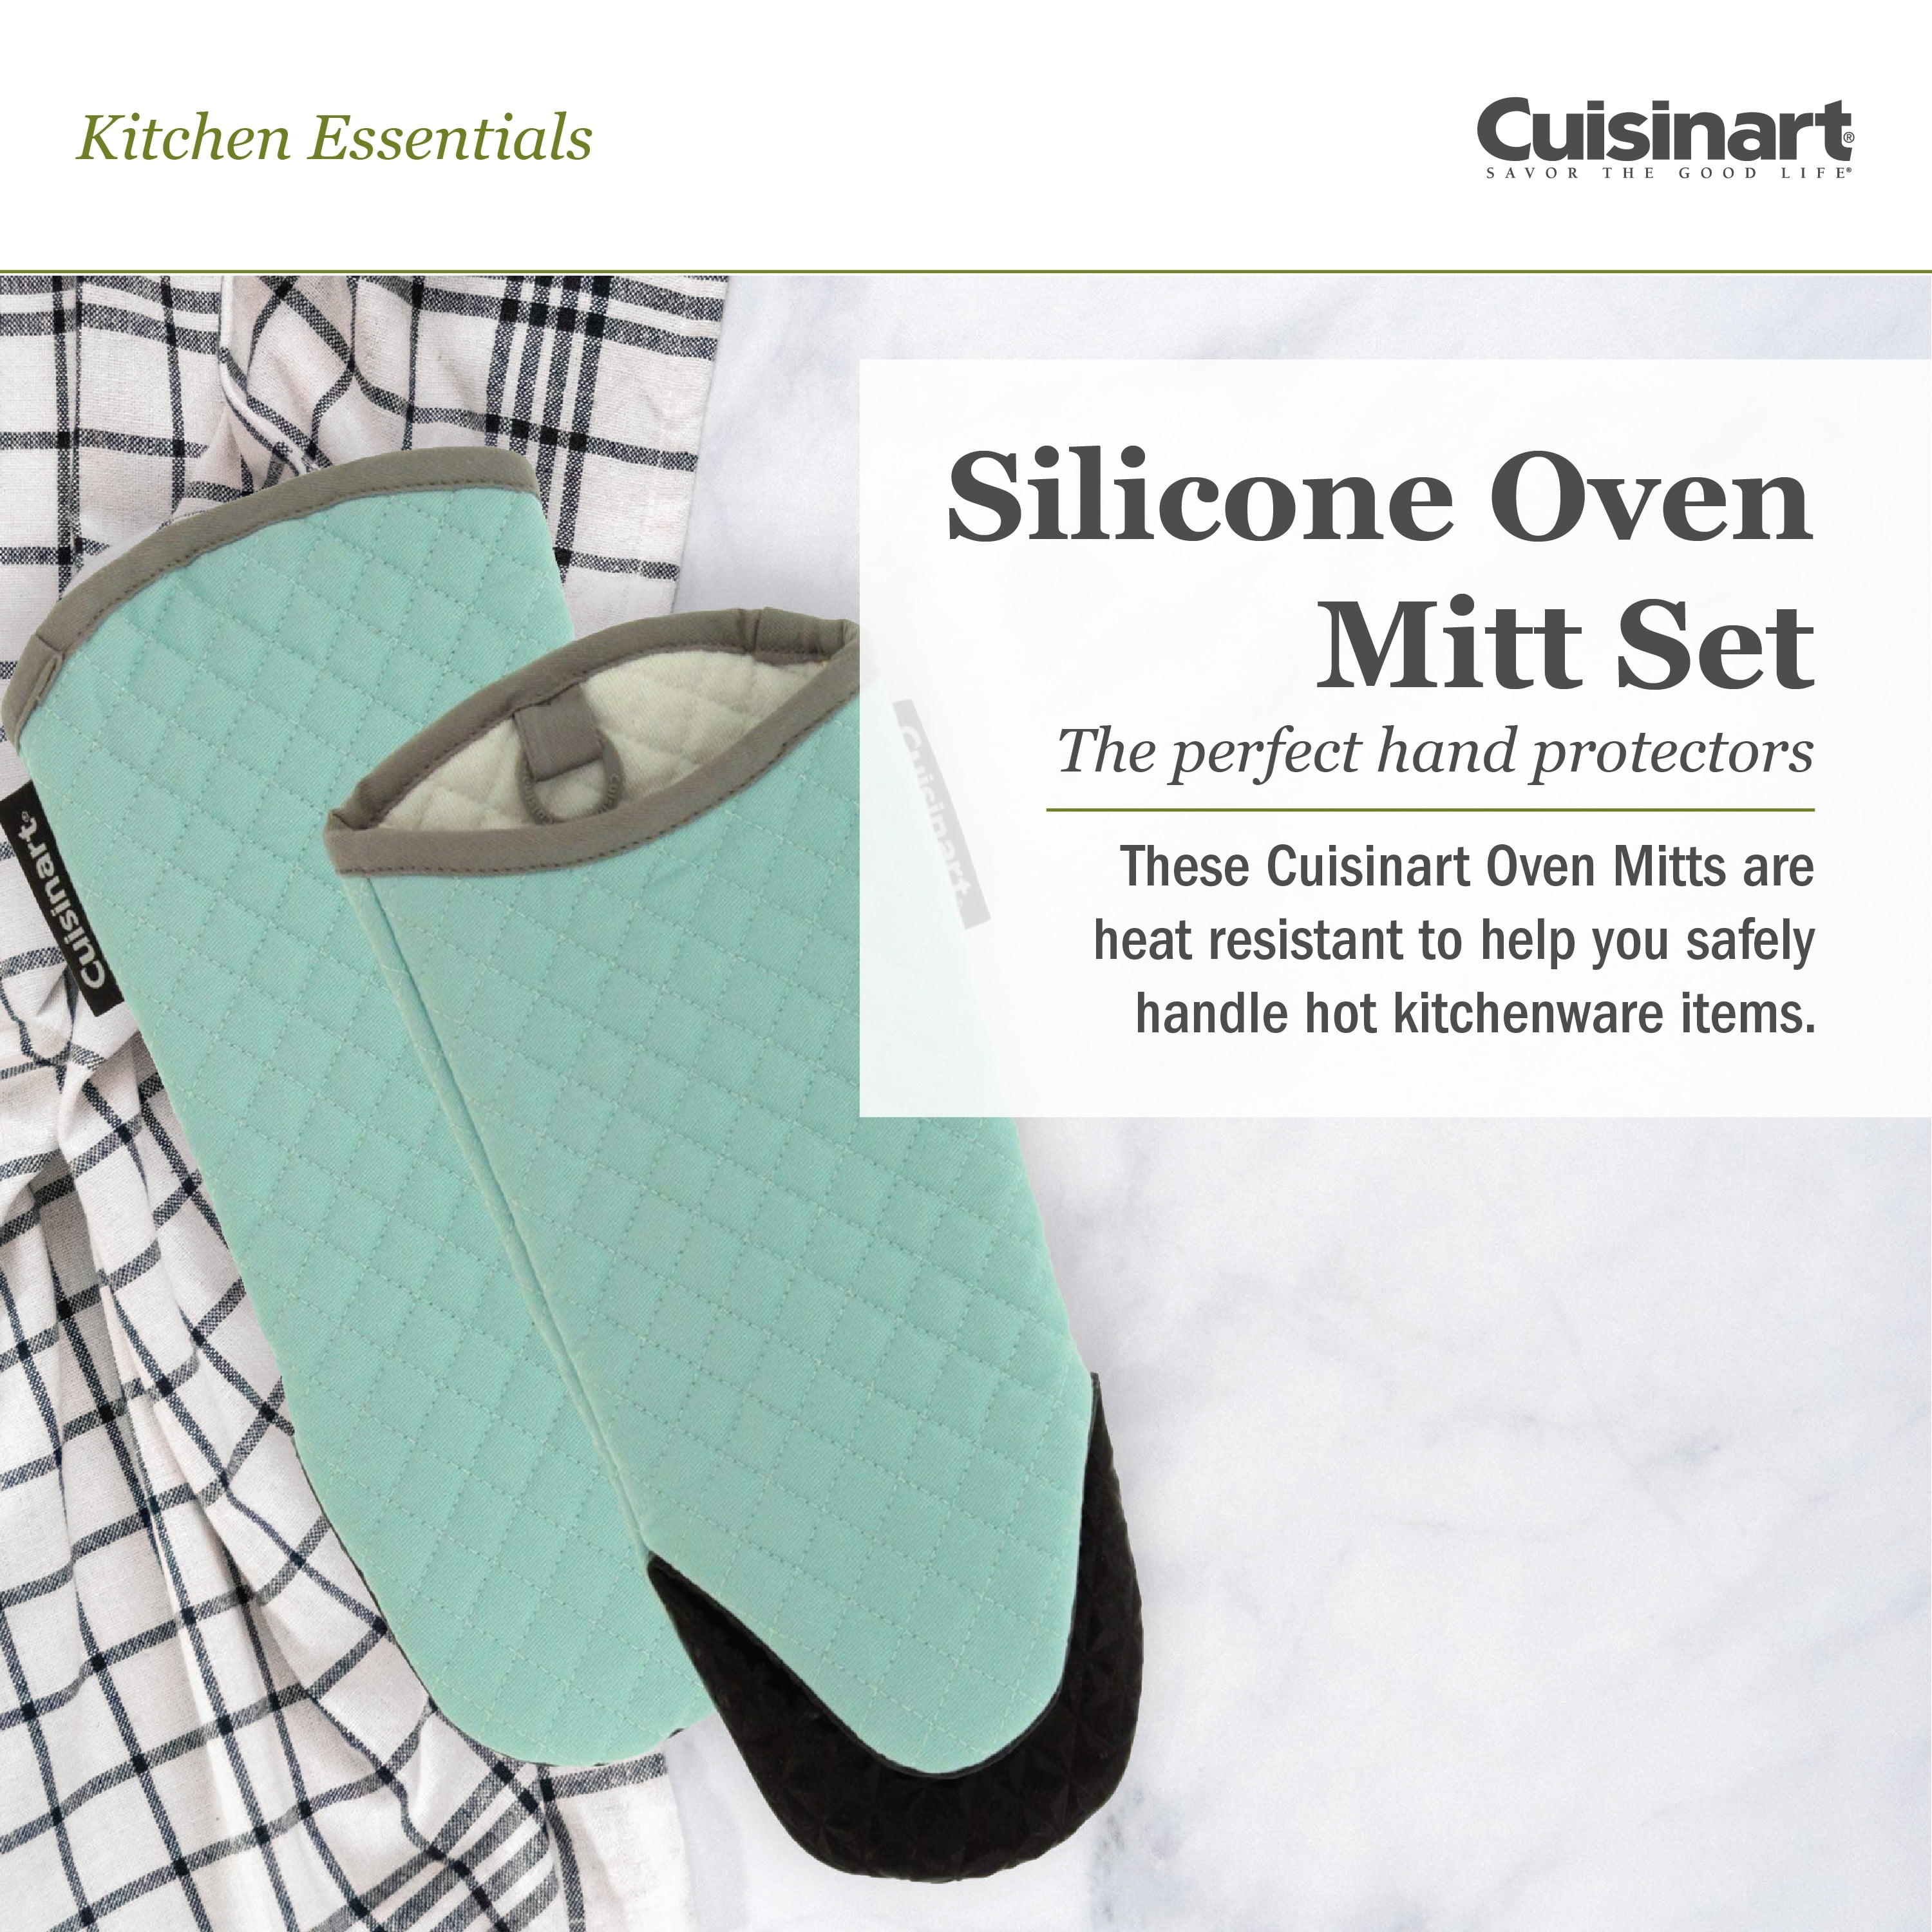 Cuisinart Quilted Mini Kitchen Oven Mitts/Gloves w/Silicone for Easy  Gripping, Heat Resistant up to 500 degrees F- Drizzle Grey w/Blue Stripes 